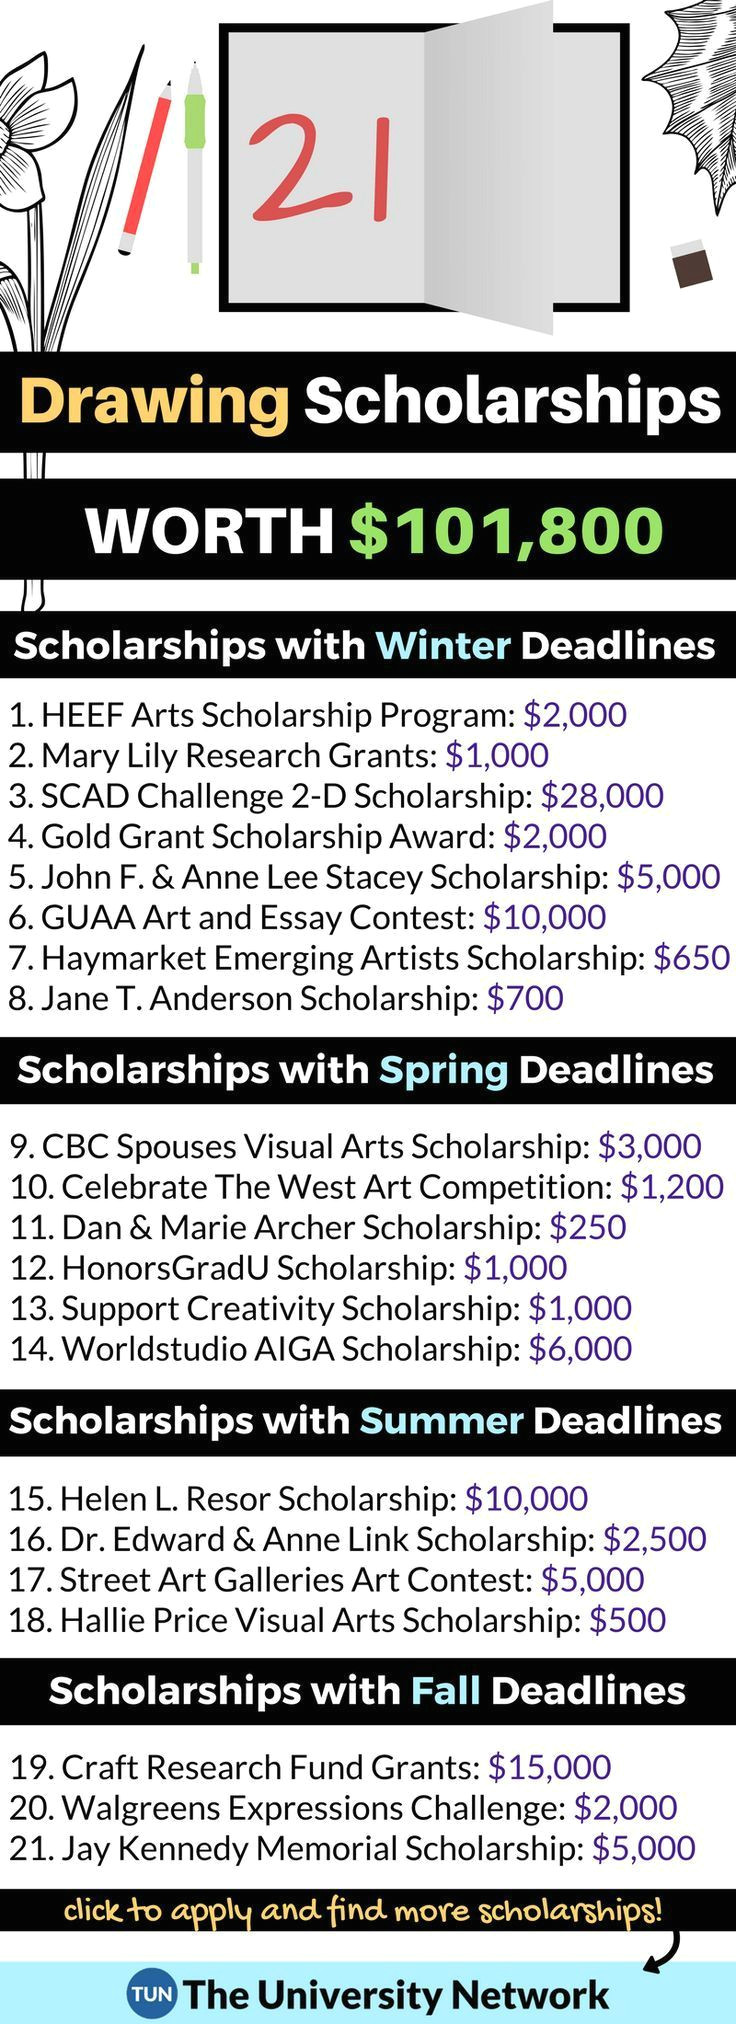 here is a selection of drawing scholarships that are listed on tun